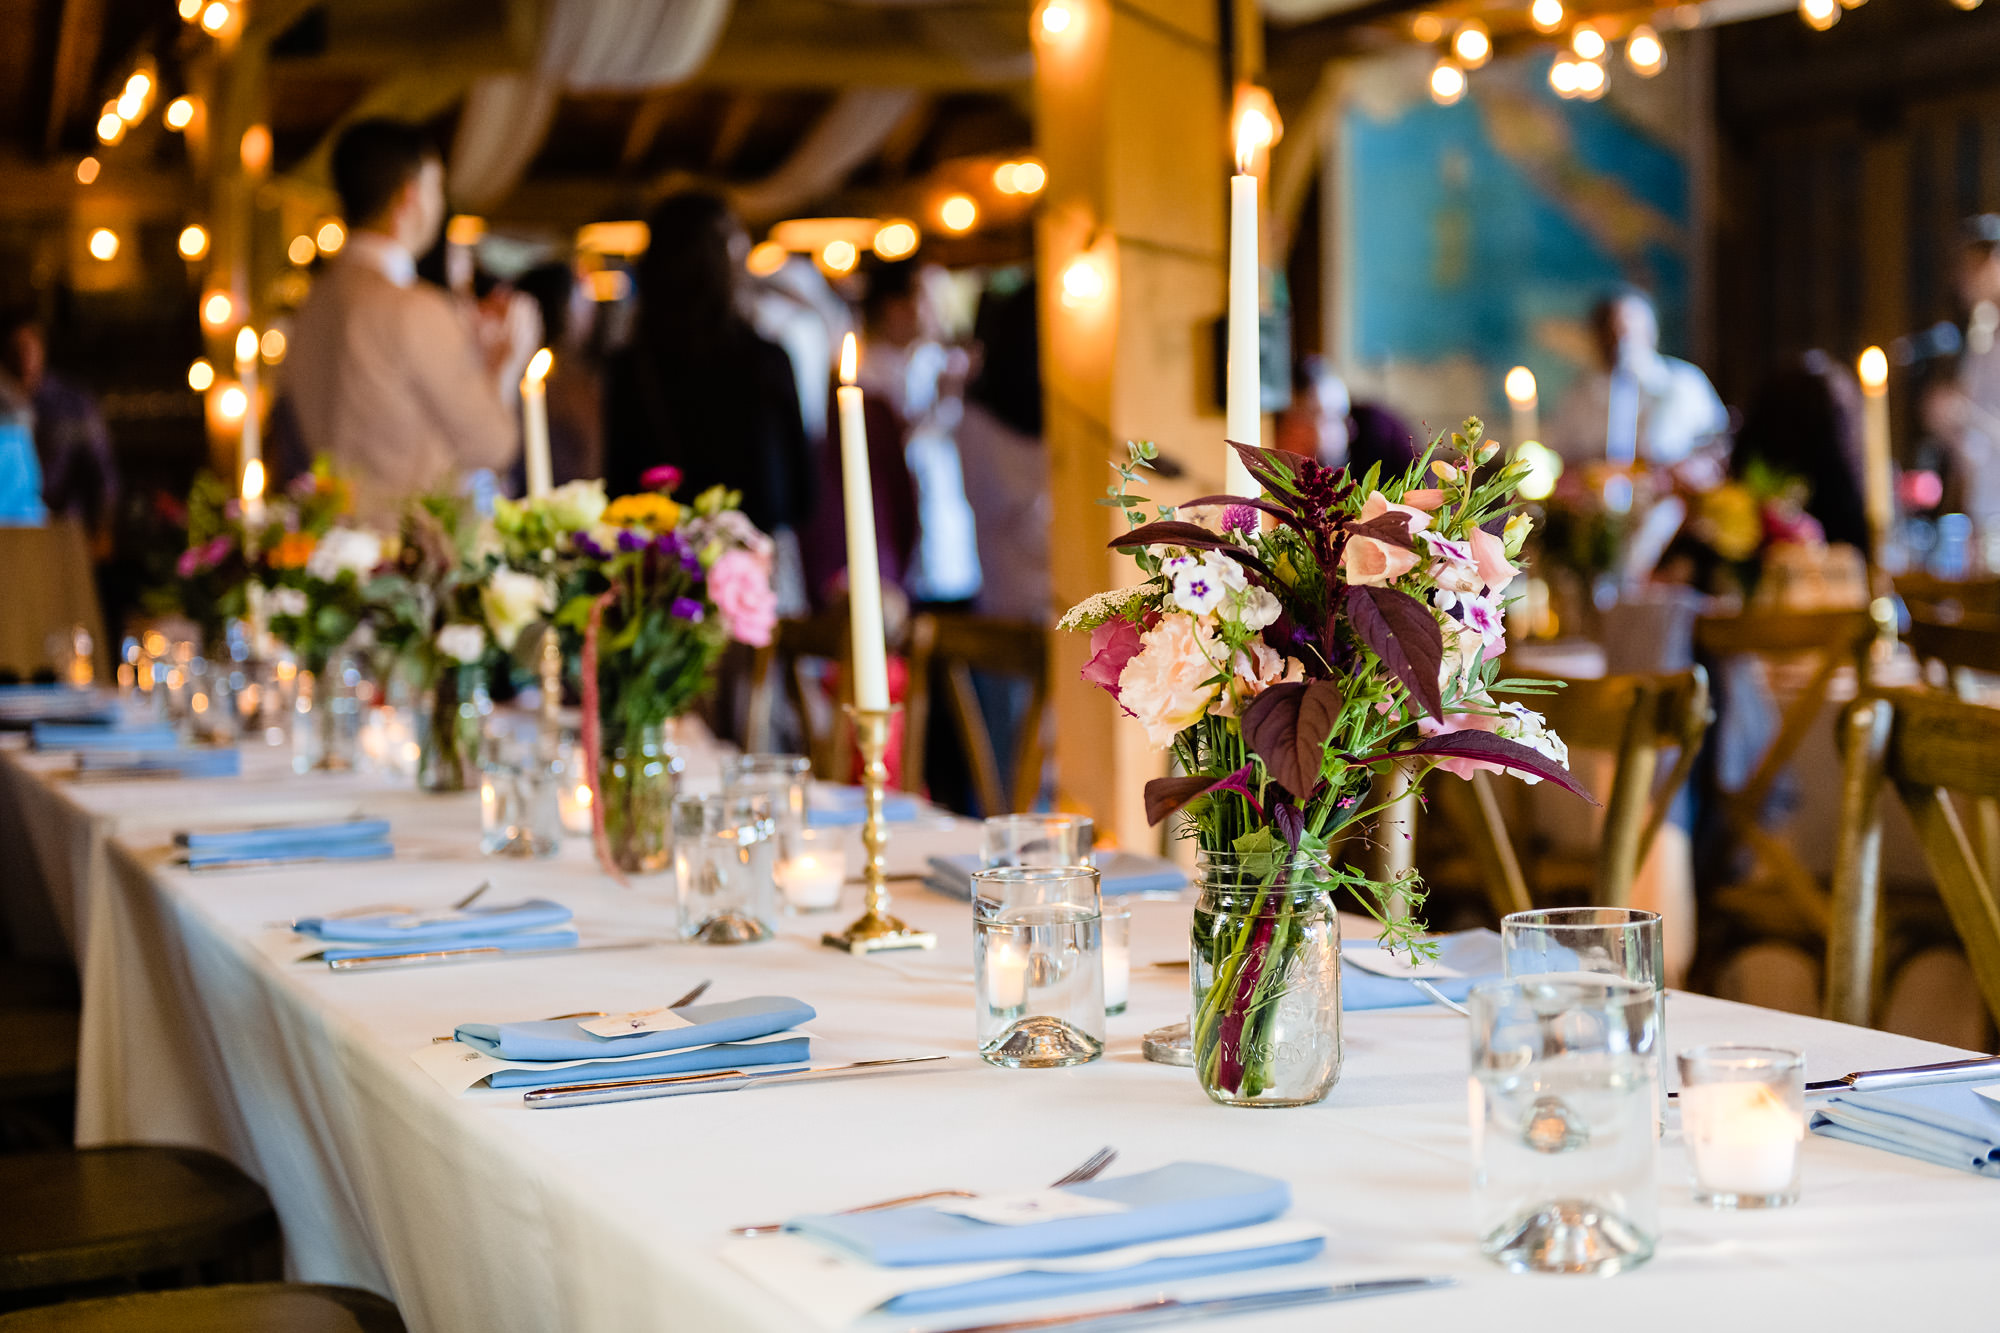 A wedding at Primo Restaurant in Rockland, Maine